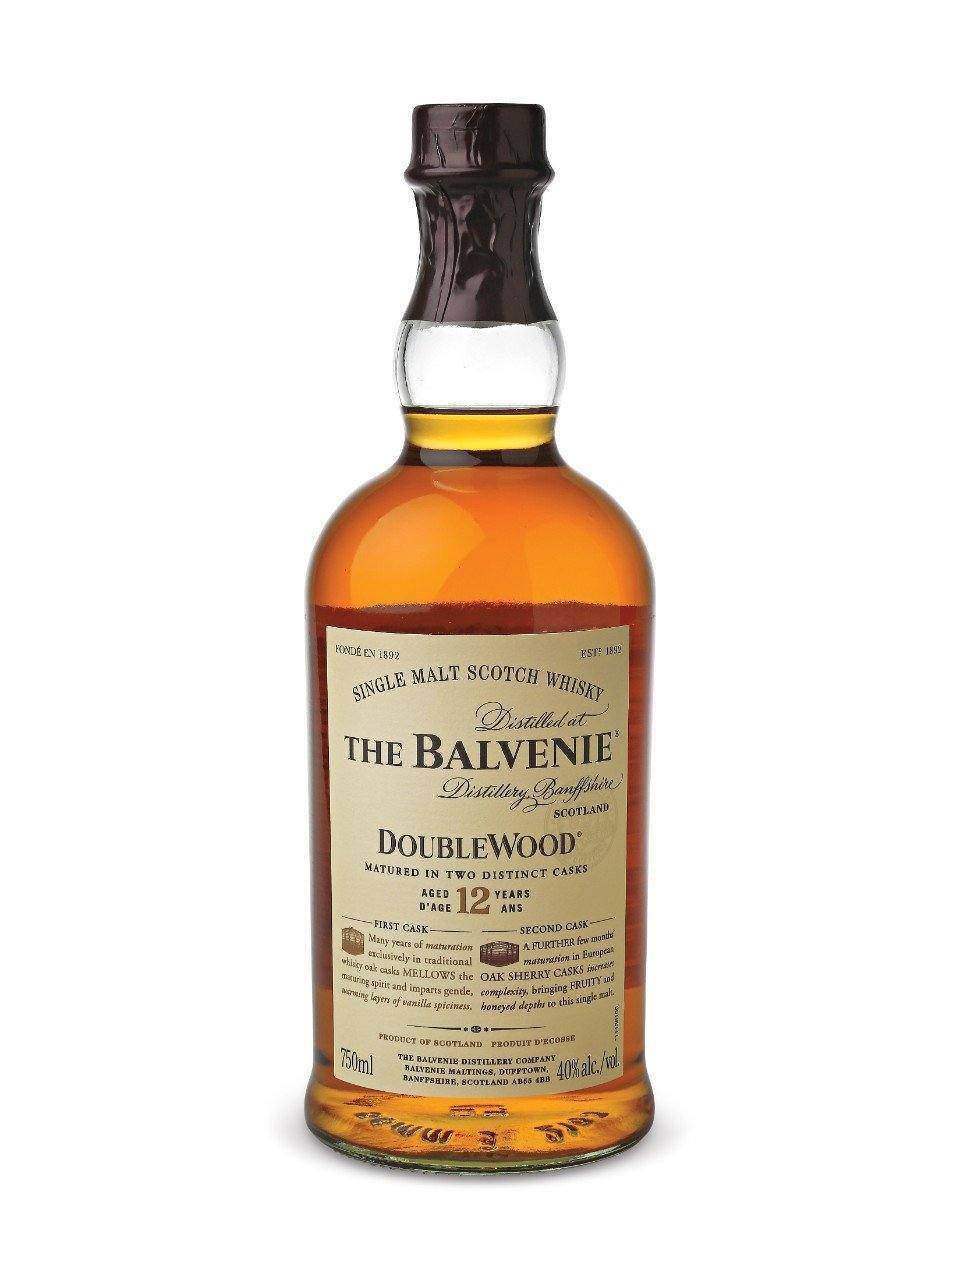 The Balvenie 12 Year Old Doublewood Scotch Whisky | Exquisite Wine & Alcohol Gift Delivery Toronto Canada | Vyno